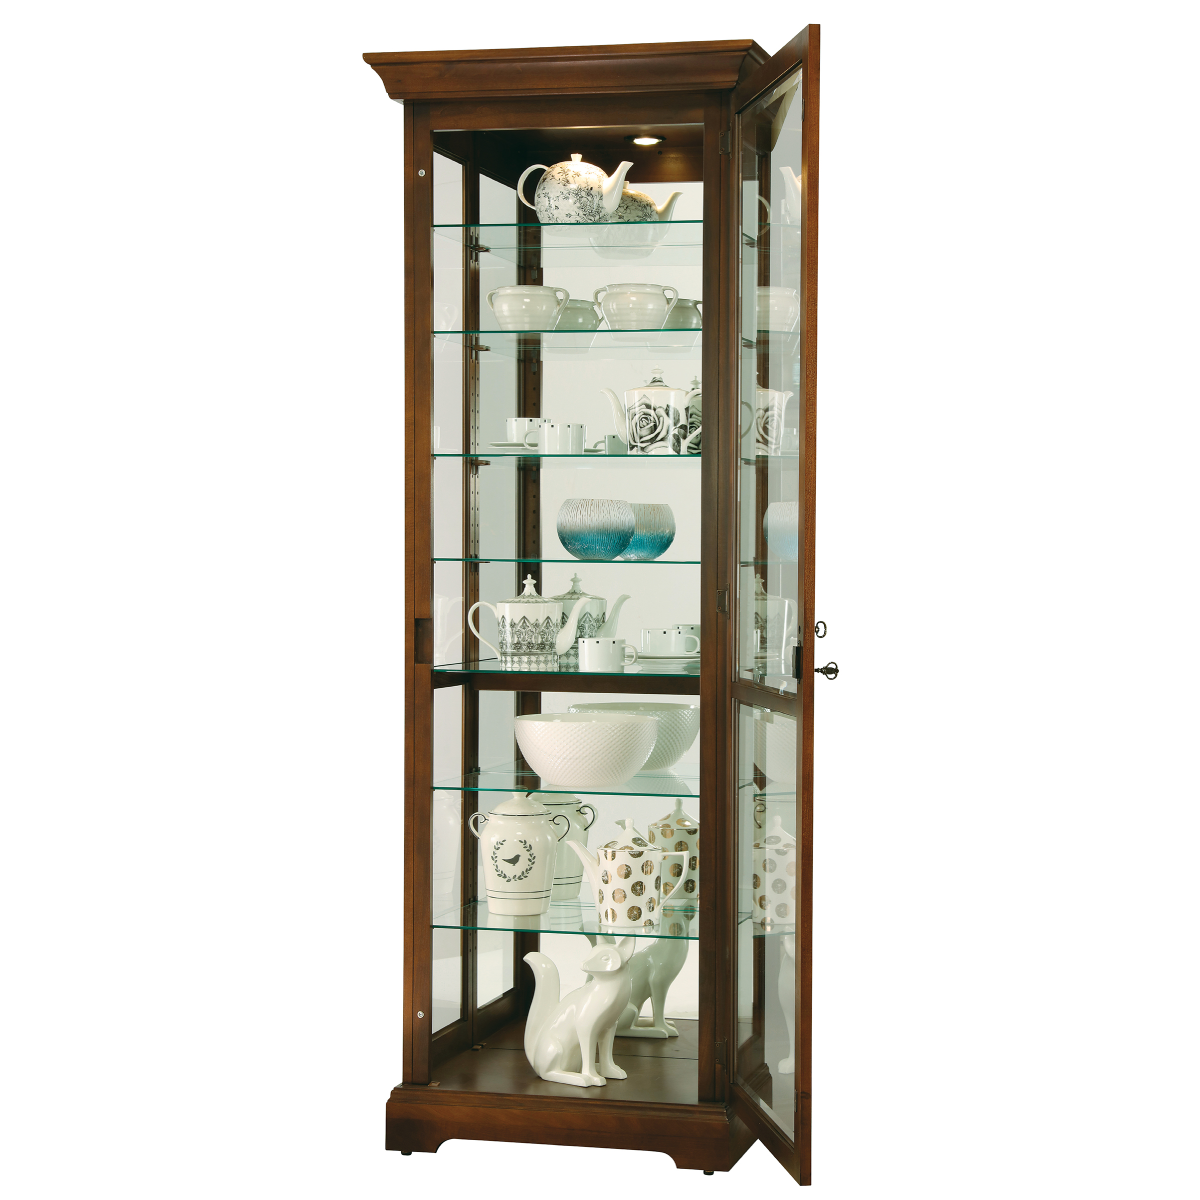 Howard Miller Chesterbrook Curio Cabinet 680658 - Home Bars USA